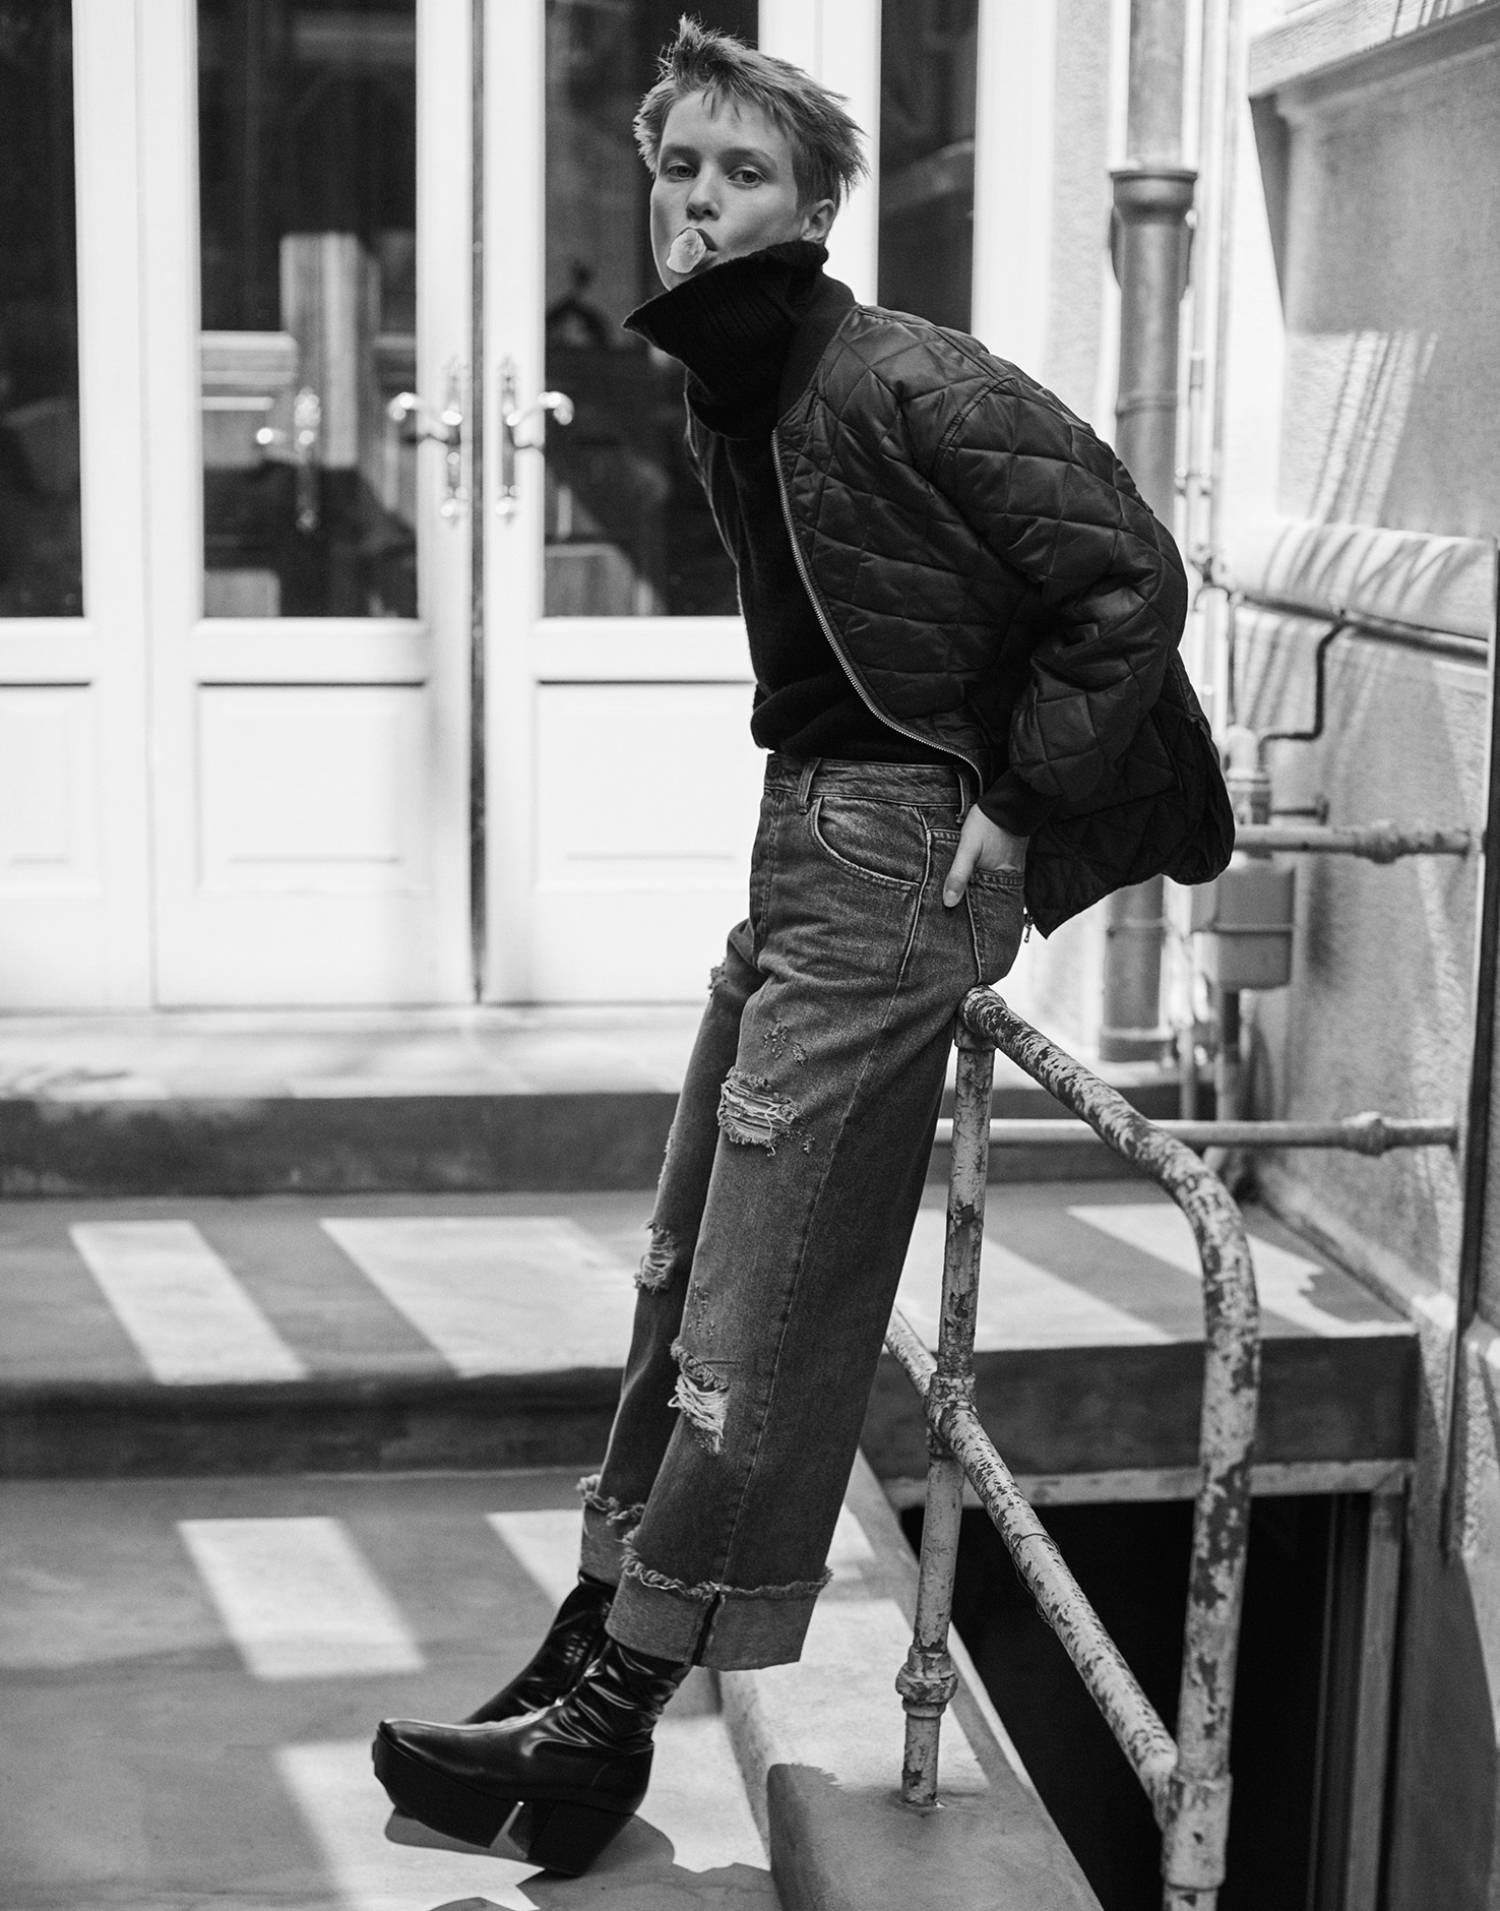 Sofia Hansson by Stefano Galuzzi for Marie Claire Italia November 2021 Clothing & Accessories: Quilted polyester jacket and jeans by Peperosa; Sleeveless sweater in wool and cashmere by Les Copains; Boots by Prada